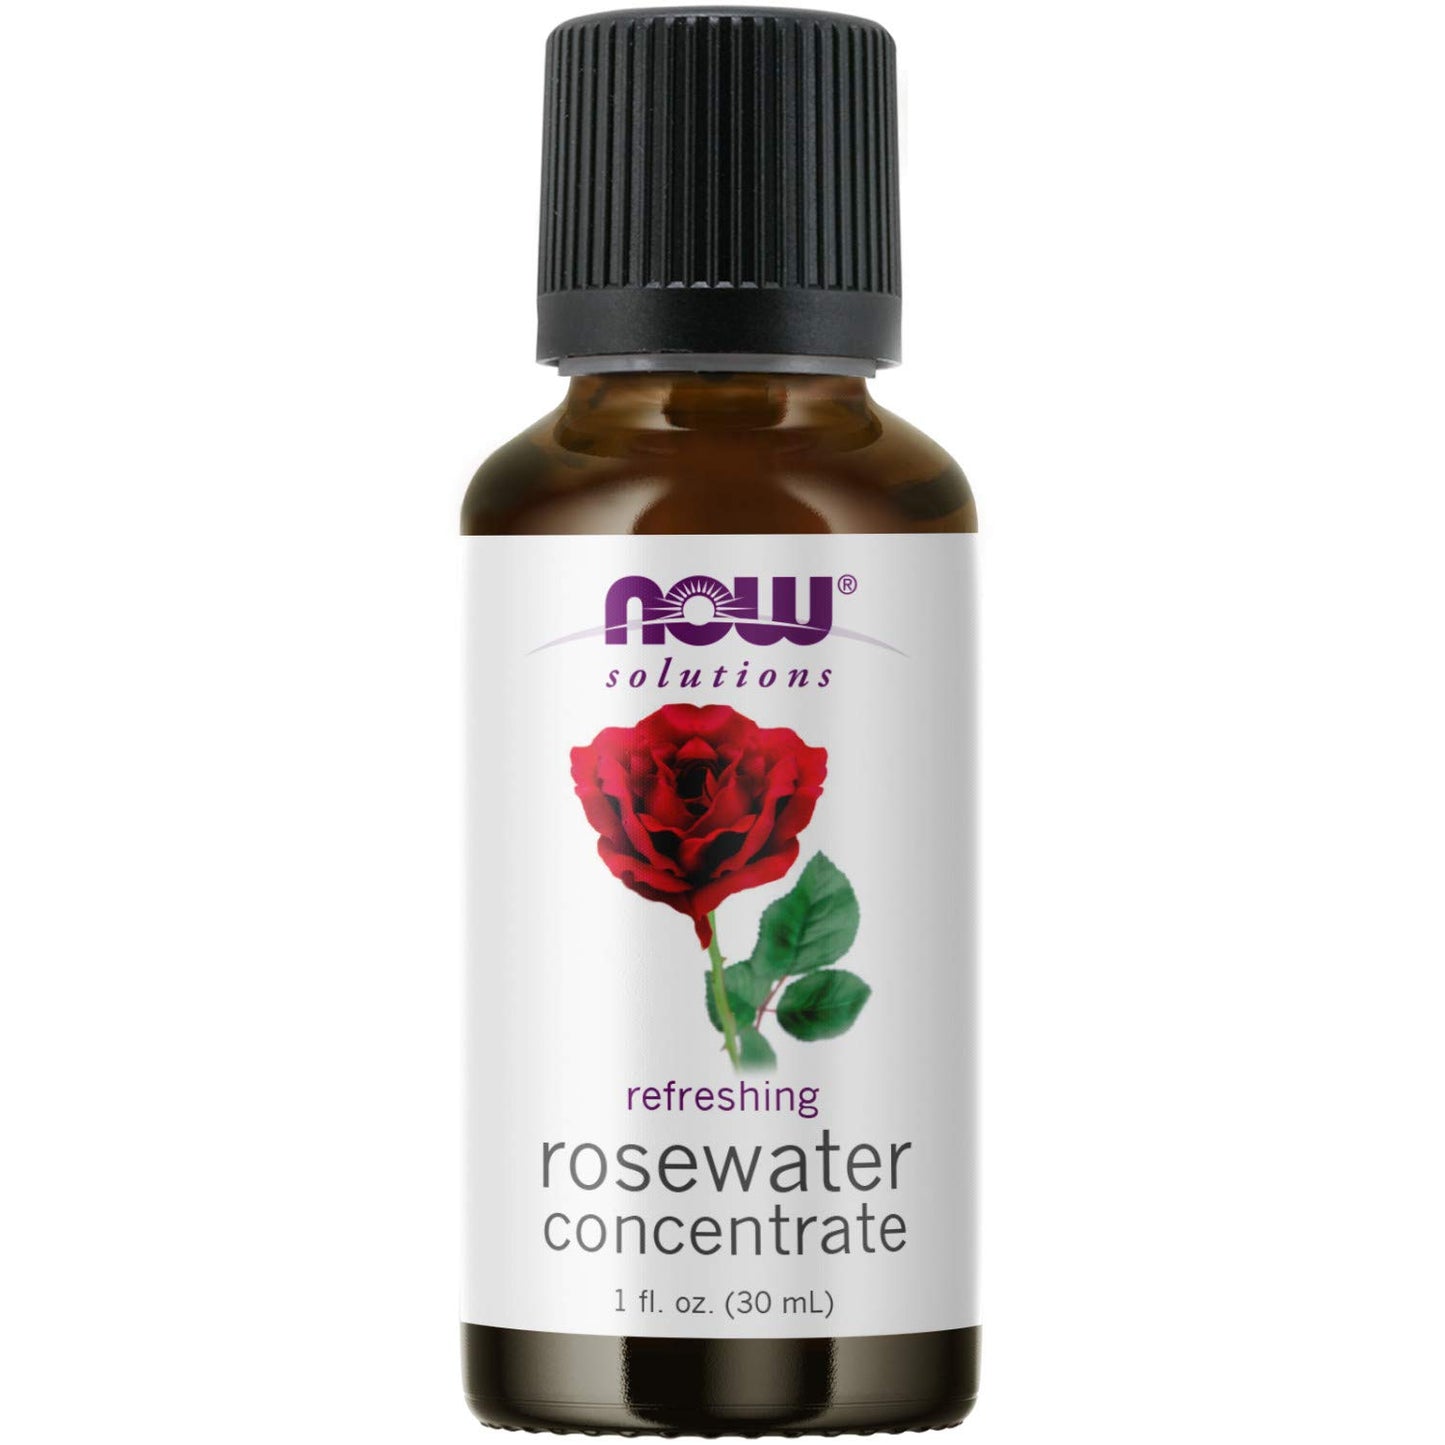 NOW SOLUTIONS ROSEWATER CONCENTRATE - E-Pharmacy Ghana